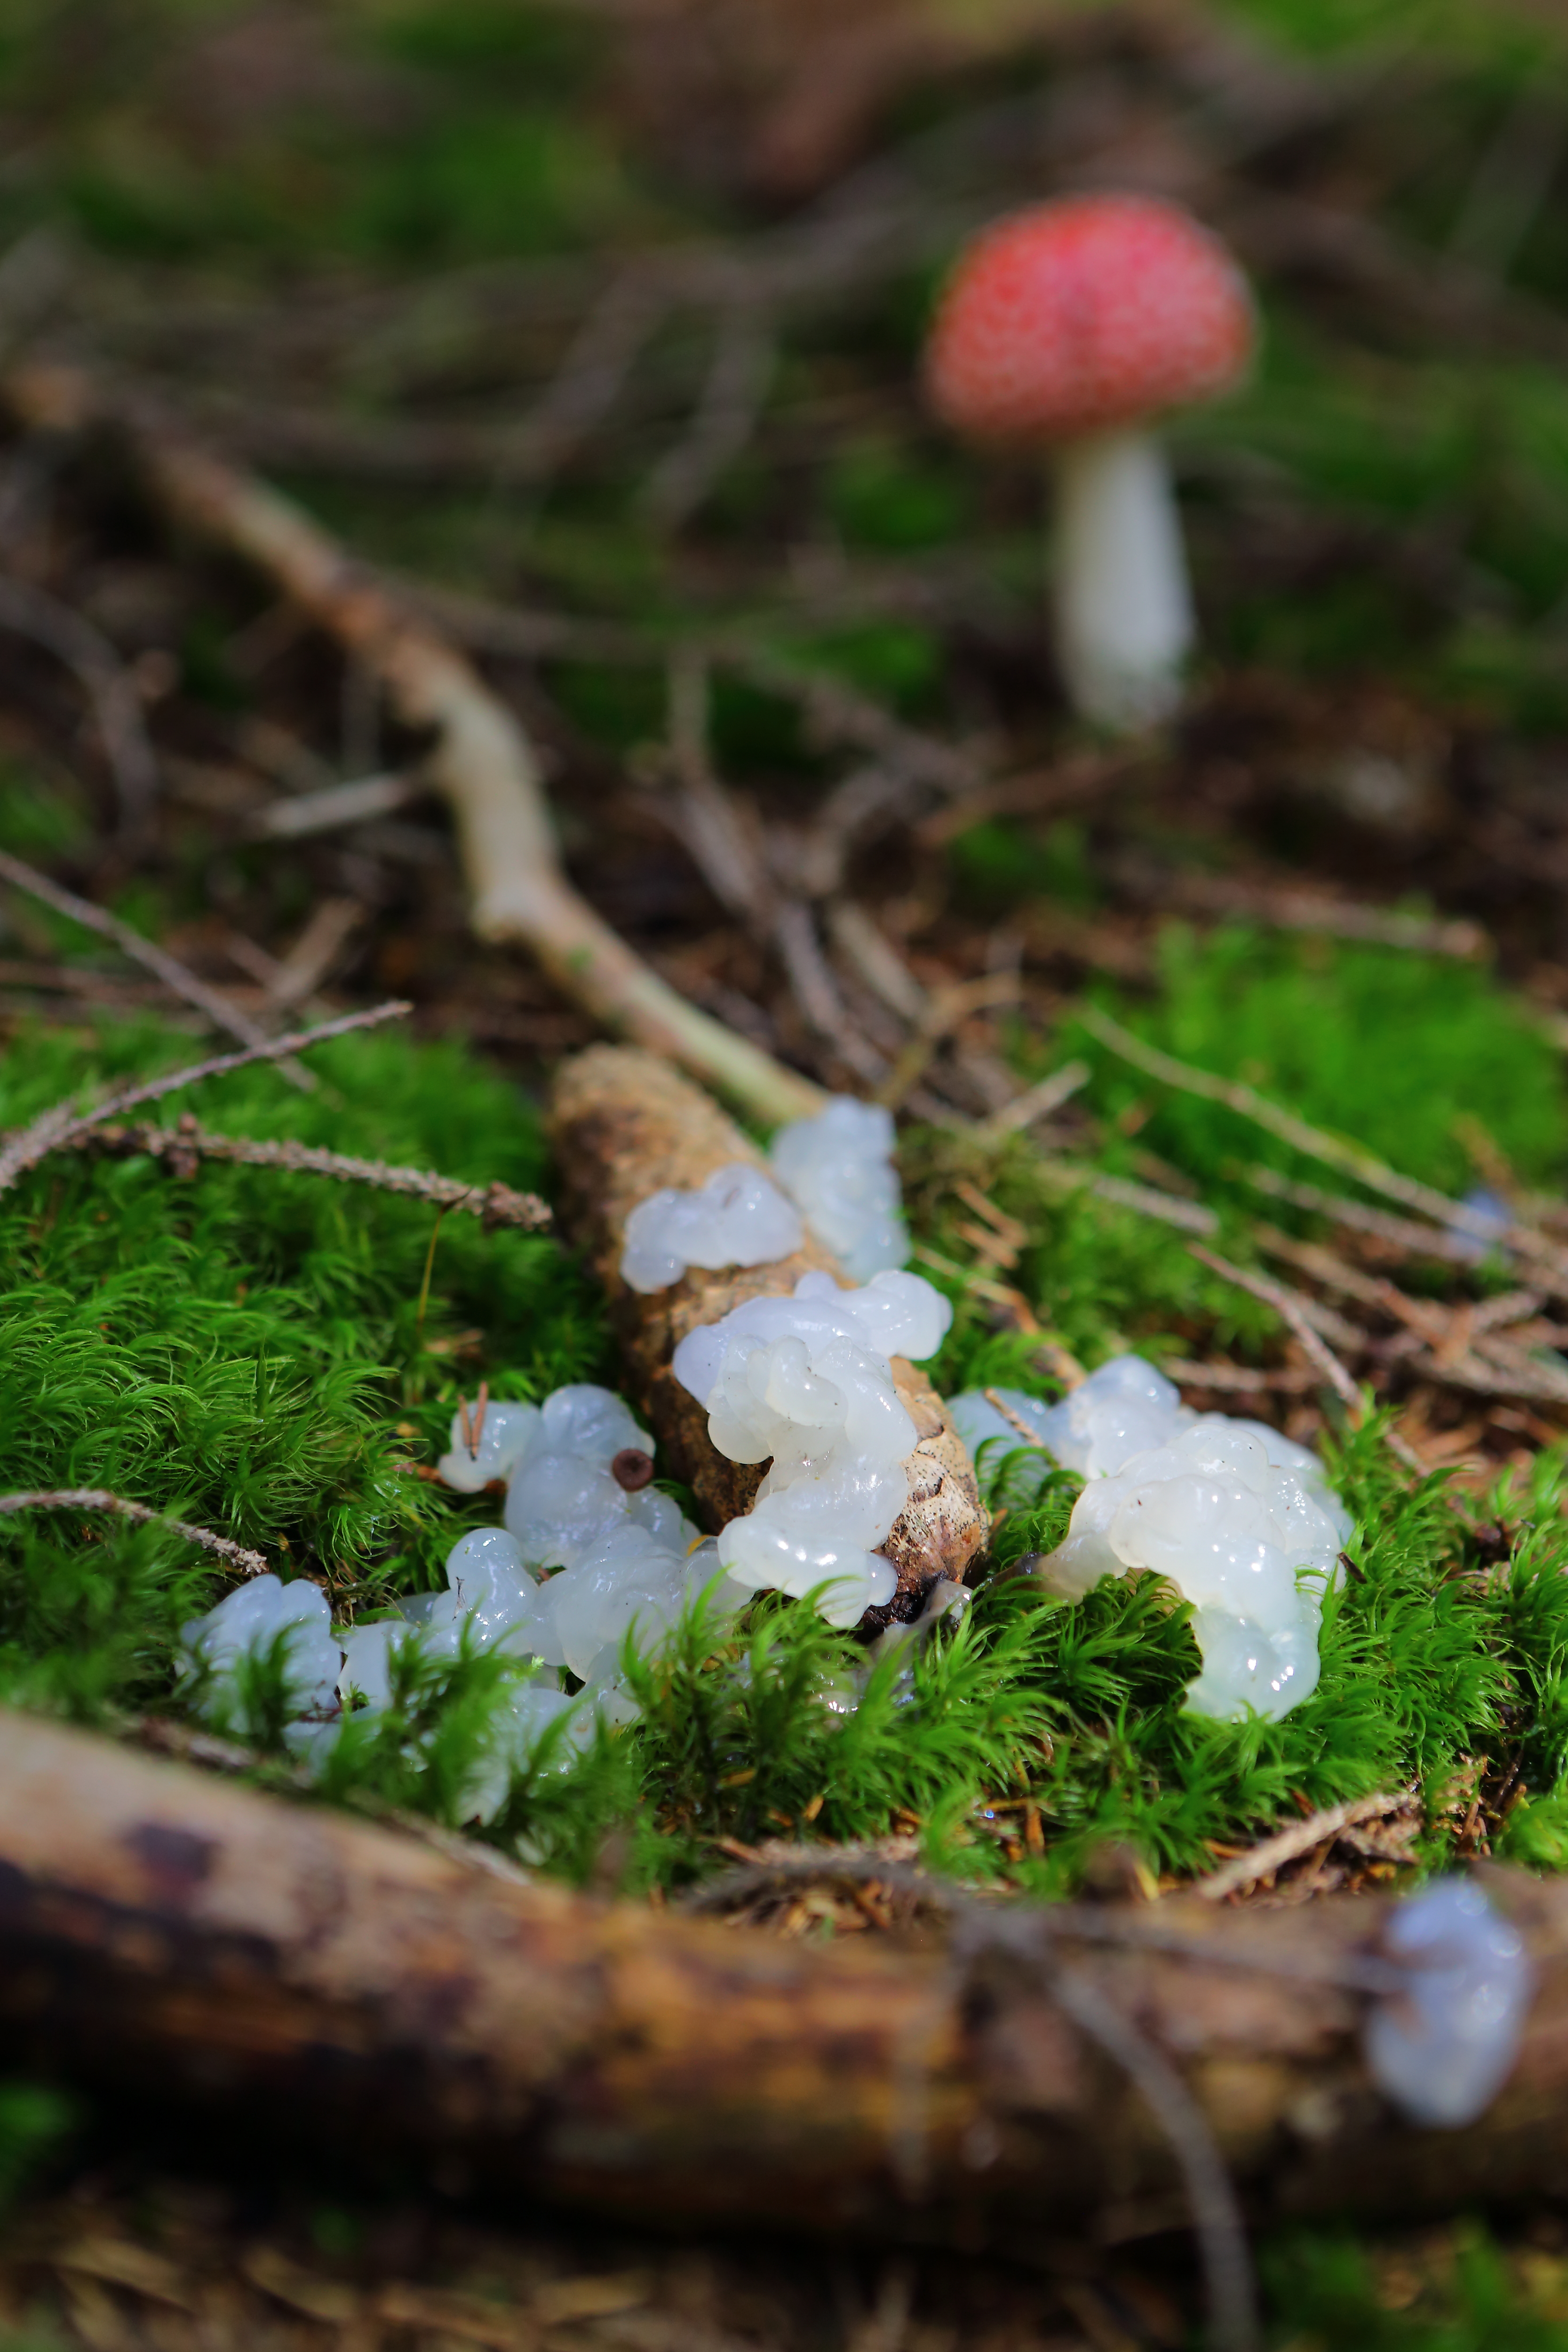 white gloop on a branch on the forest floor; a red-capped mushroom is visible out of focus in the background